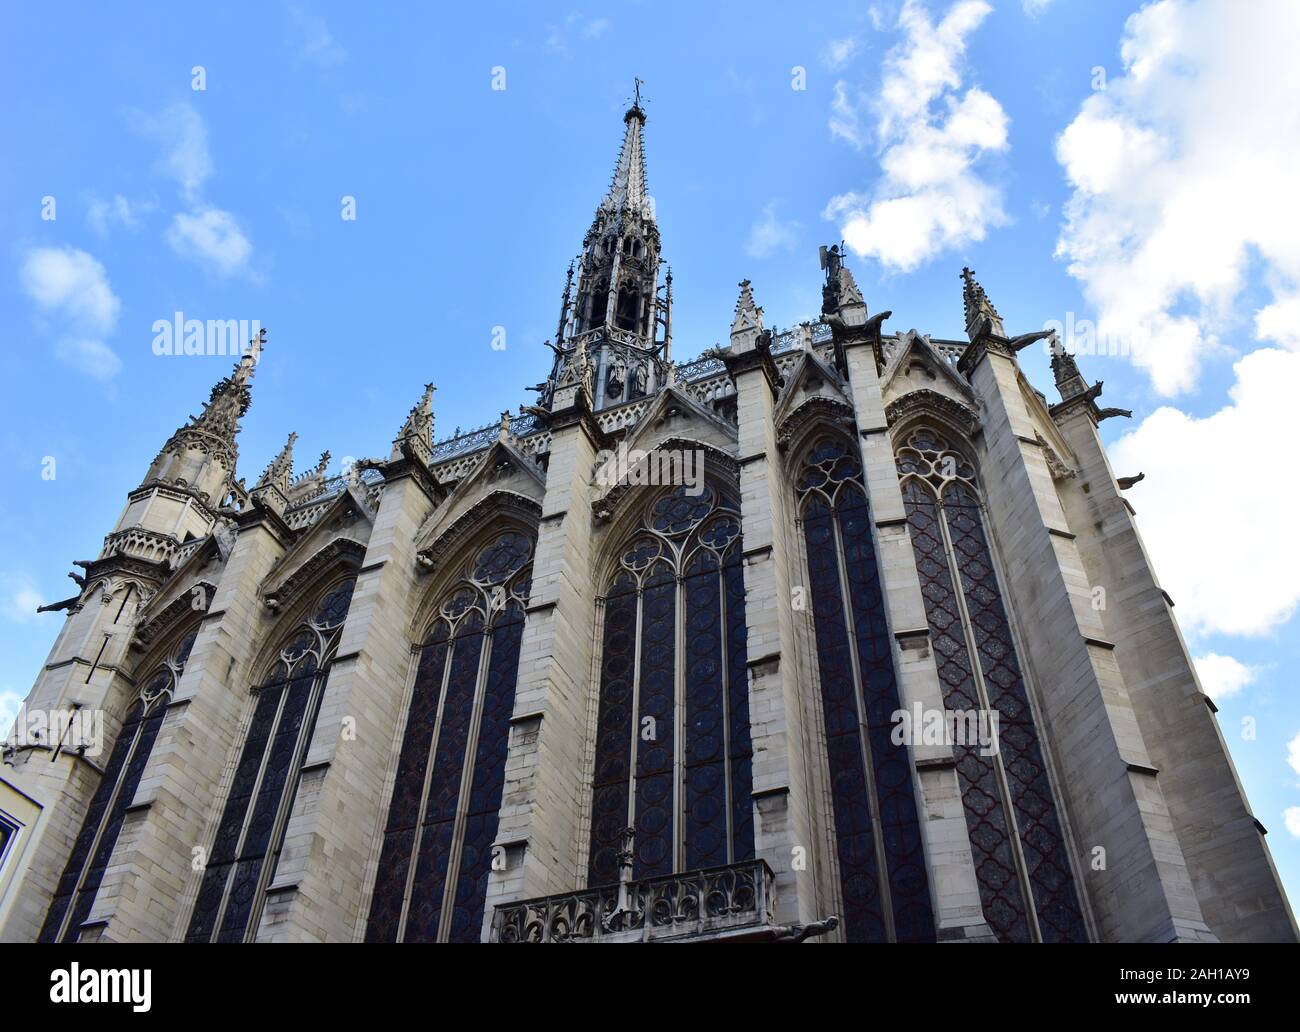 The Sainte Chapelle gothic landmark, exterior view with stained glass windows, buttress and spire.  Paris, France. Stock Photo